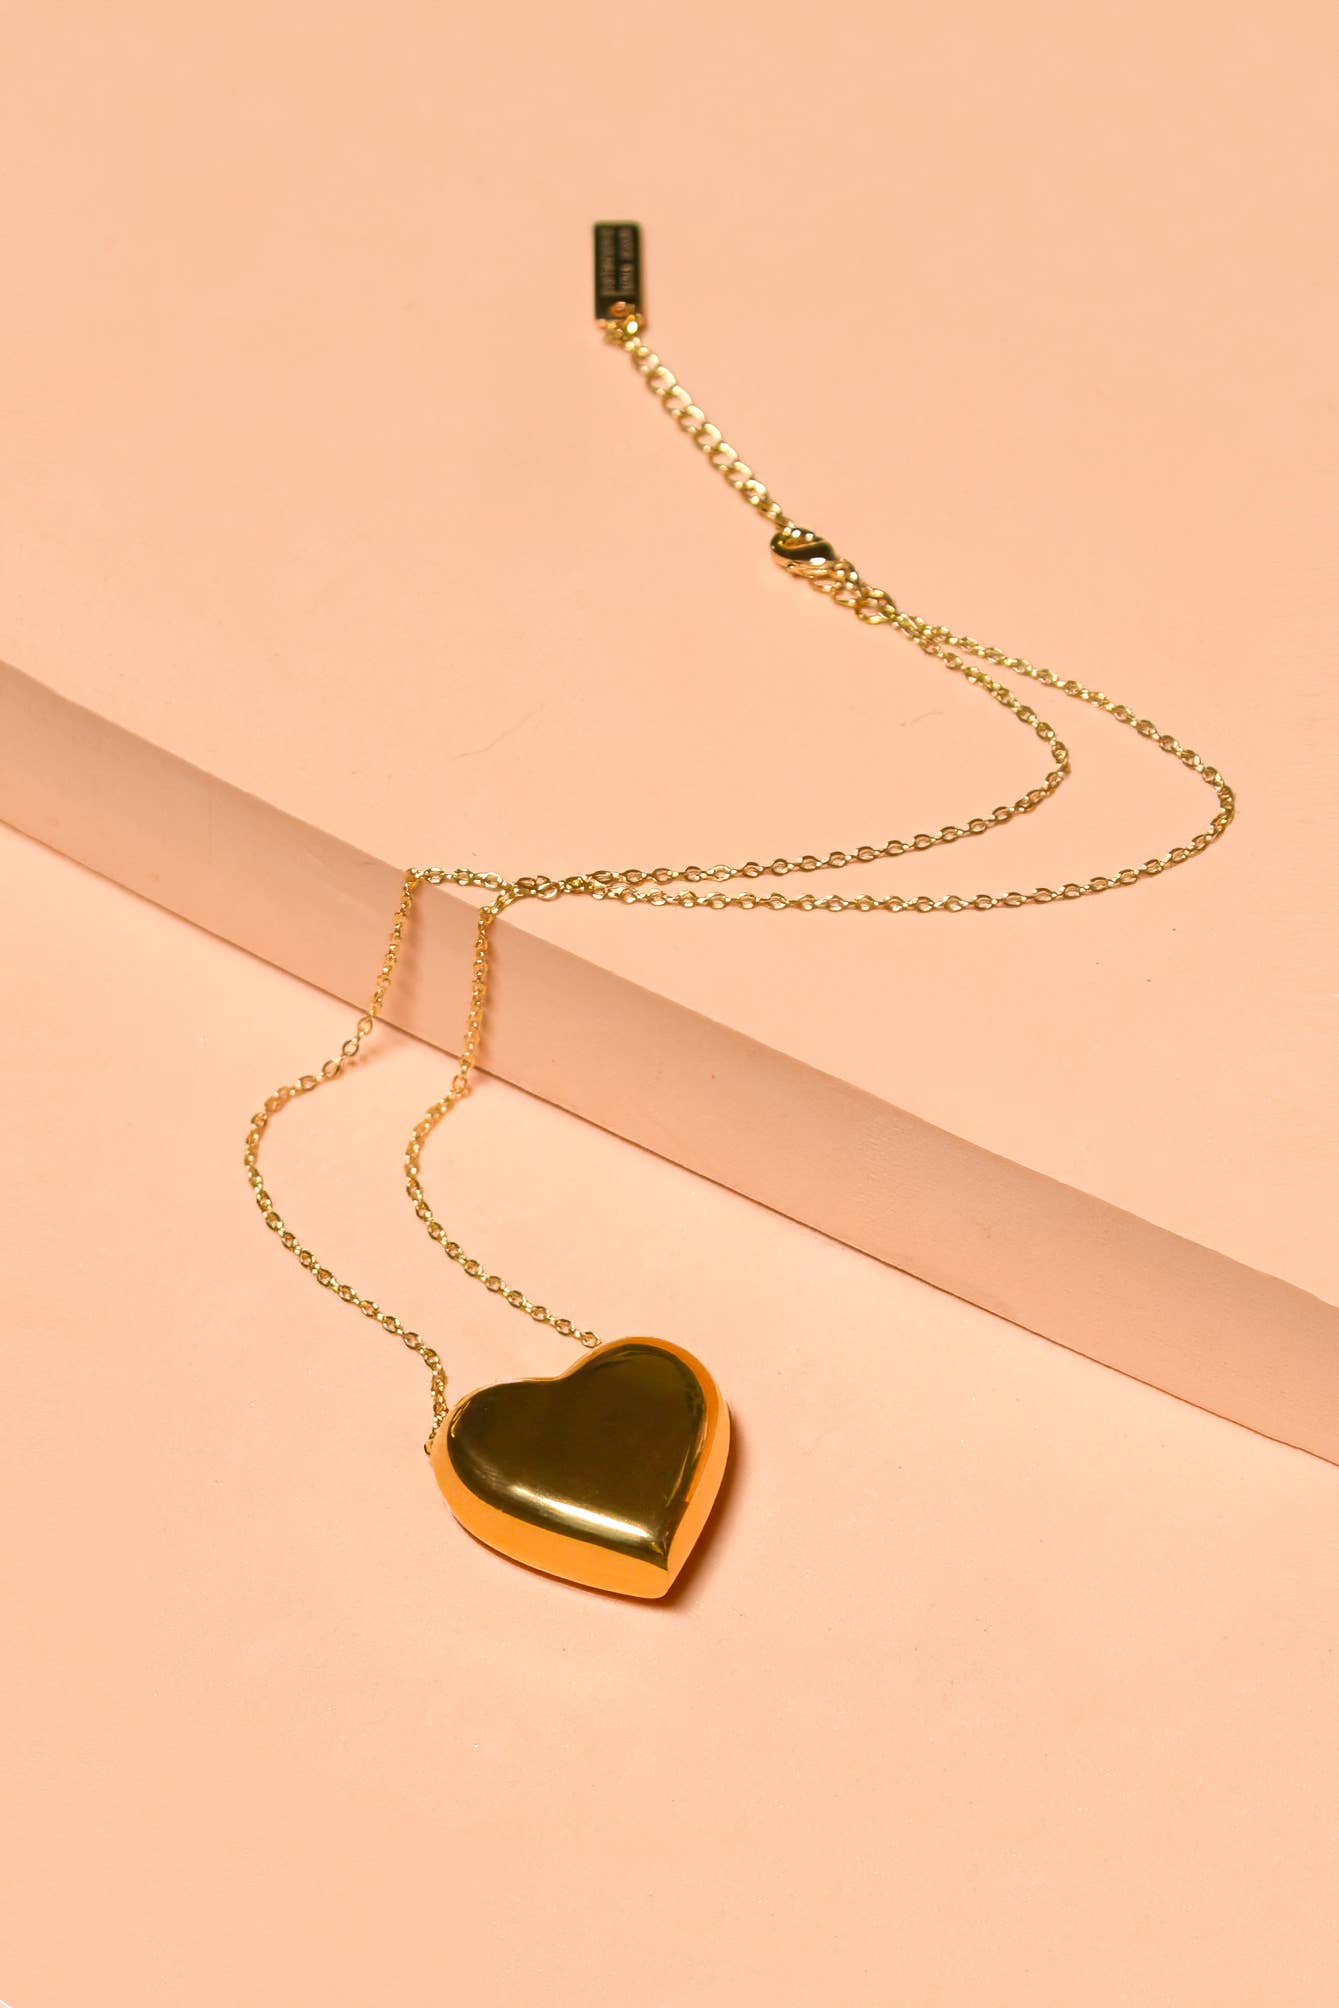 Can't Heartly Wait Necklace - 18K Gold Plated - Out of the Blue